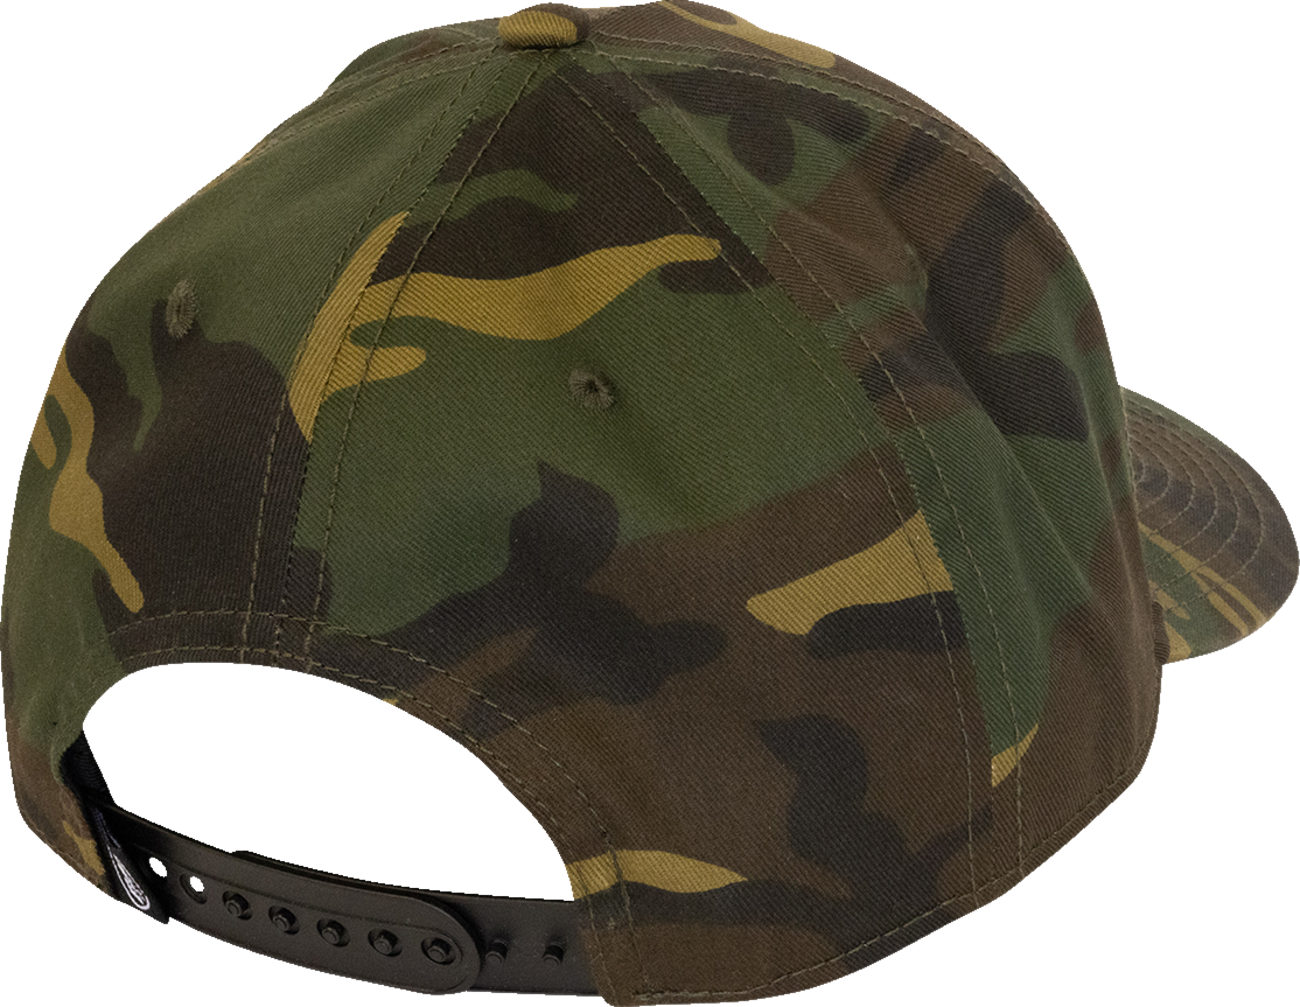 FMF Outsiders Hat - Camouflage SP23196907CAM 2501-4059